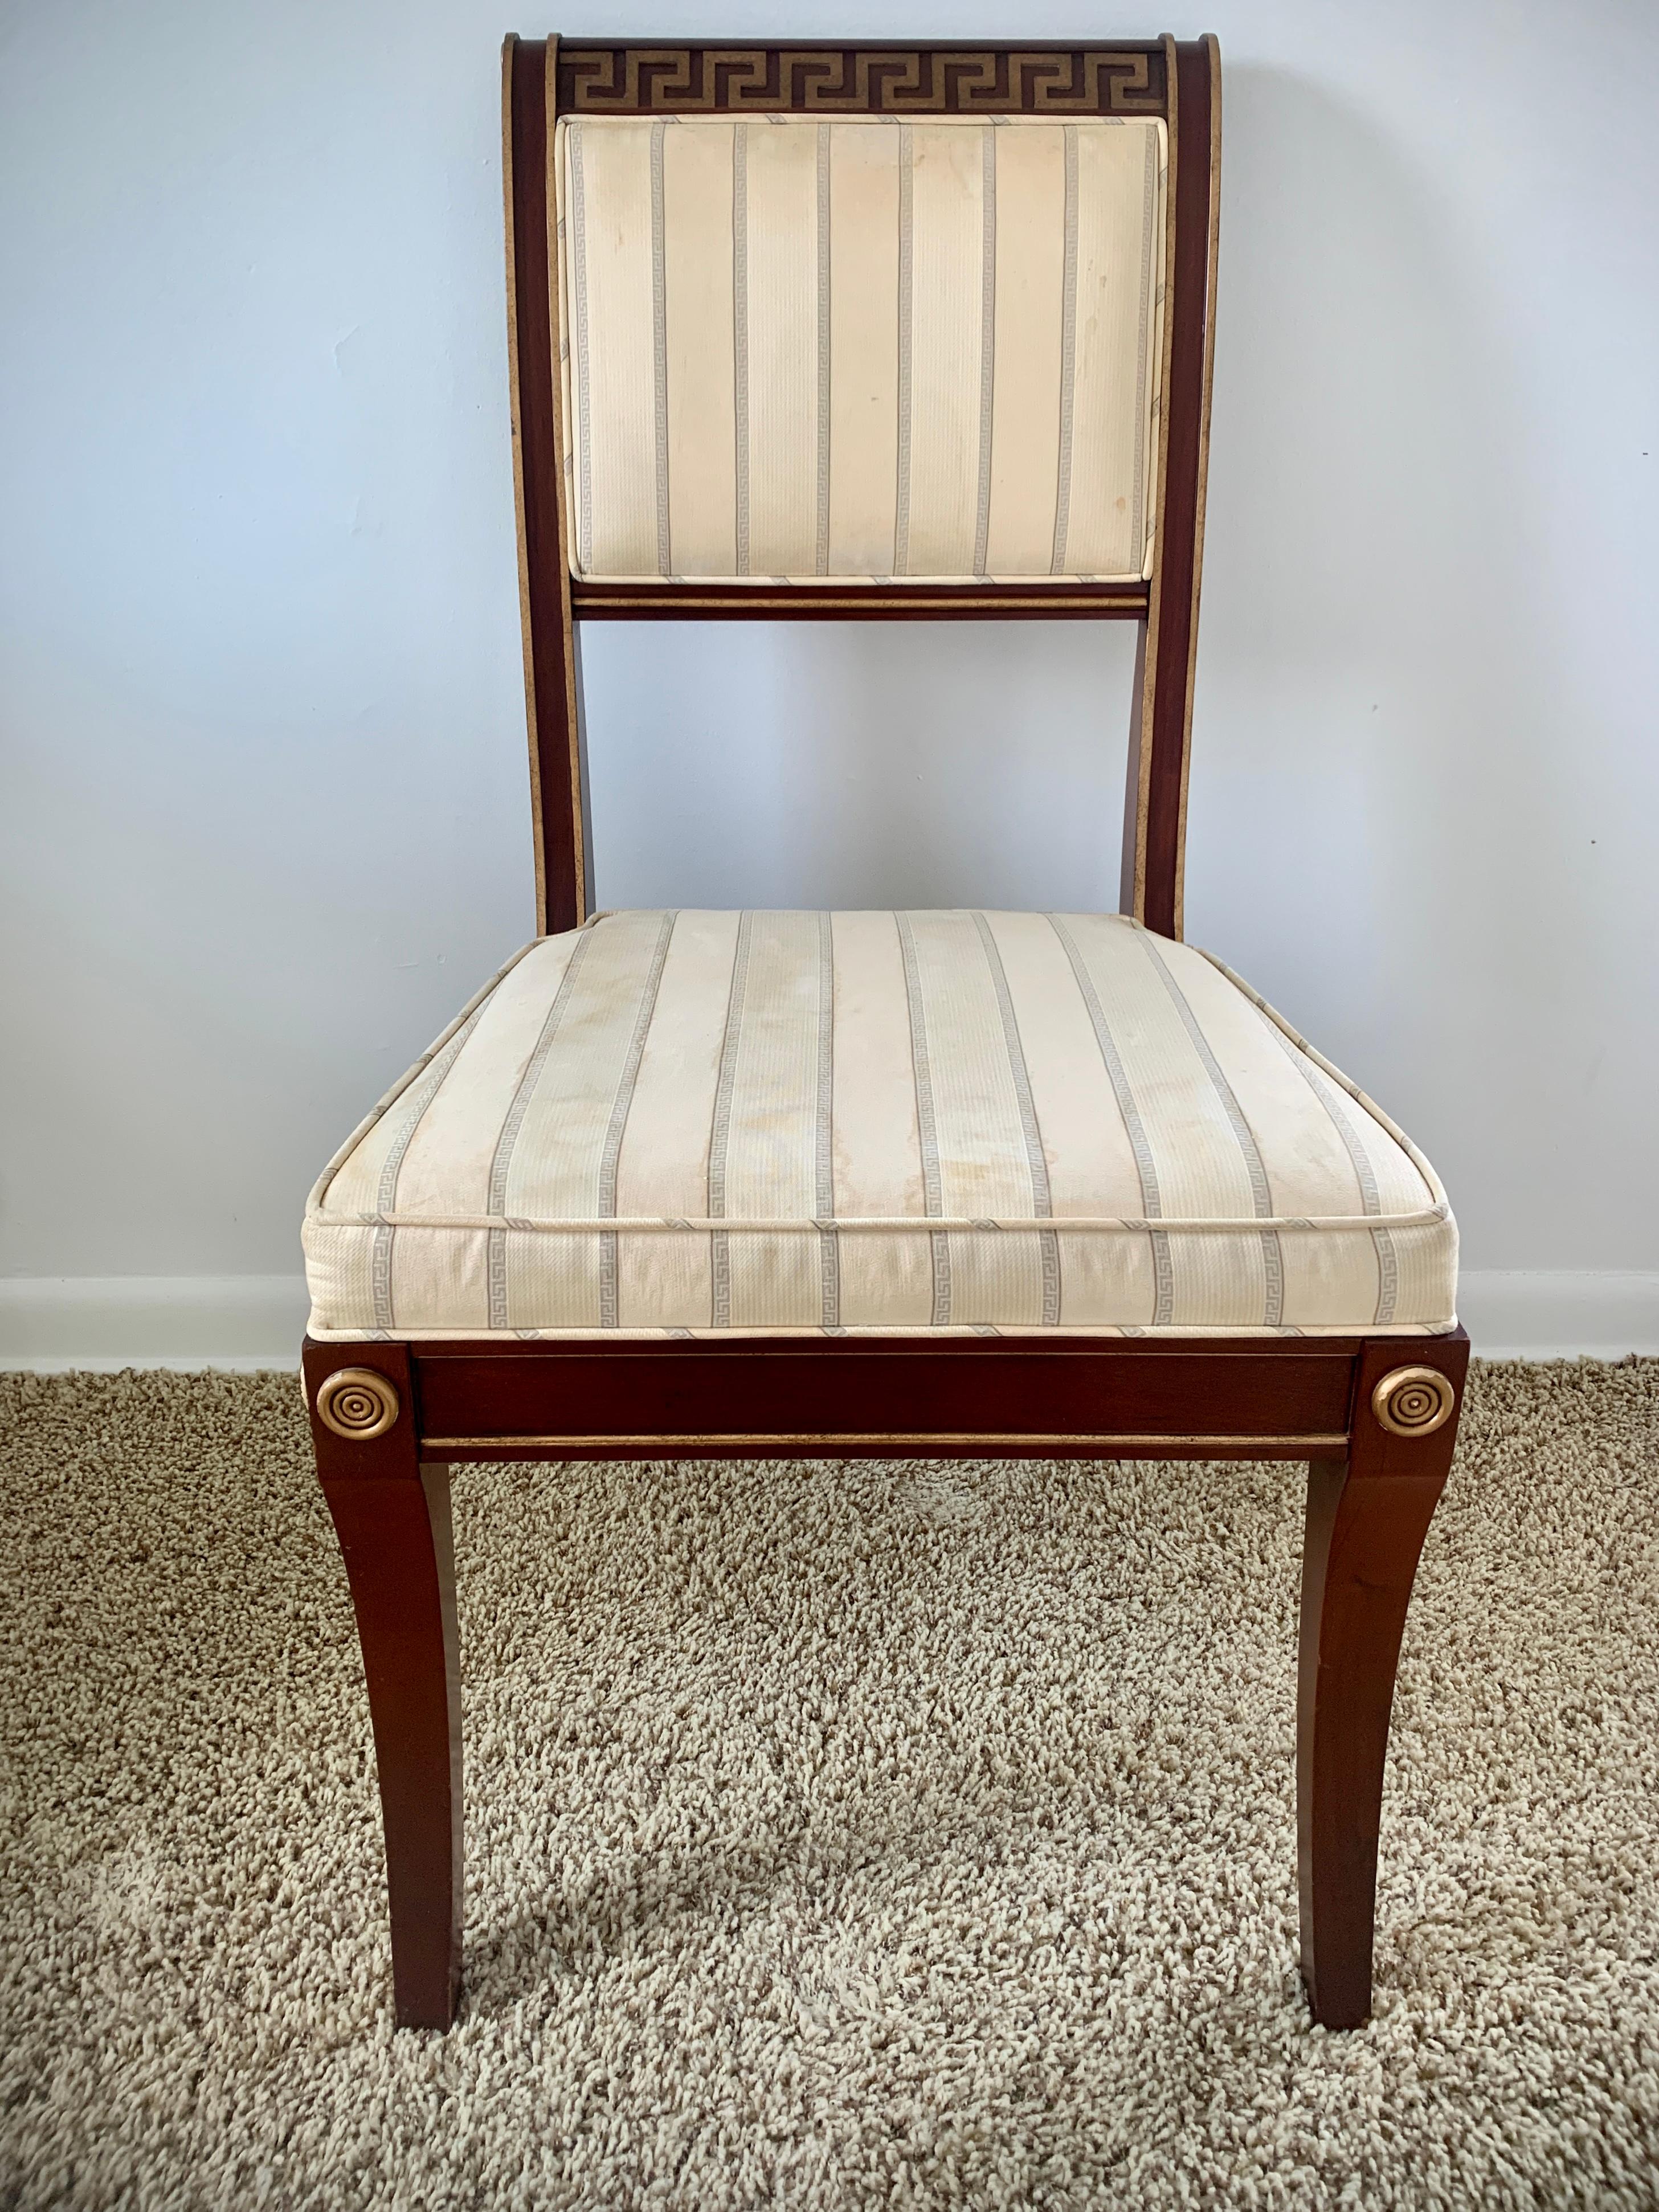 A gorgeous Regency or Neoclassical style dining chair

By Baker Furniture

USA, Late 20th Century

Solid carved mahogany frames, with giltwood Greek key design, and blue & white striped upholstered seat.

Measures: 20.75